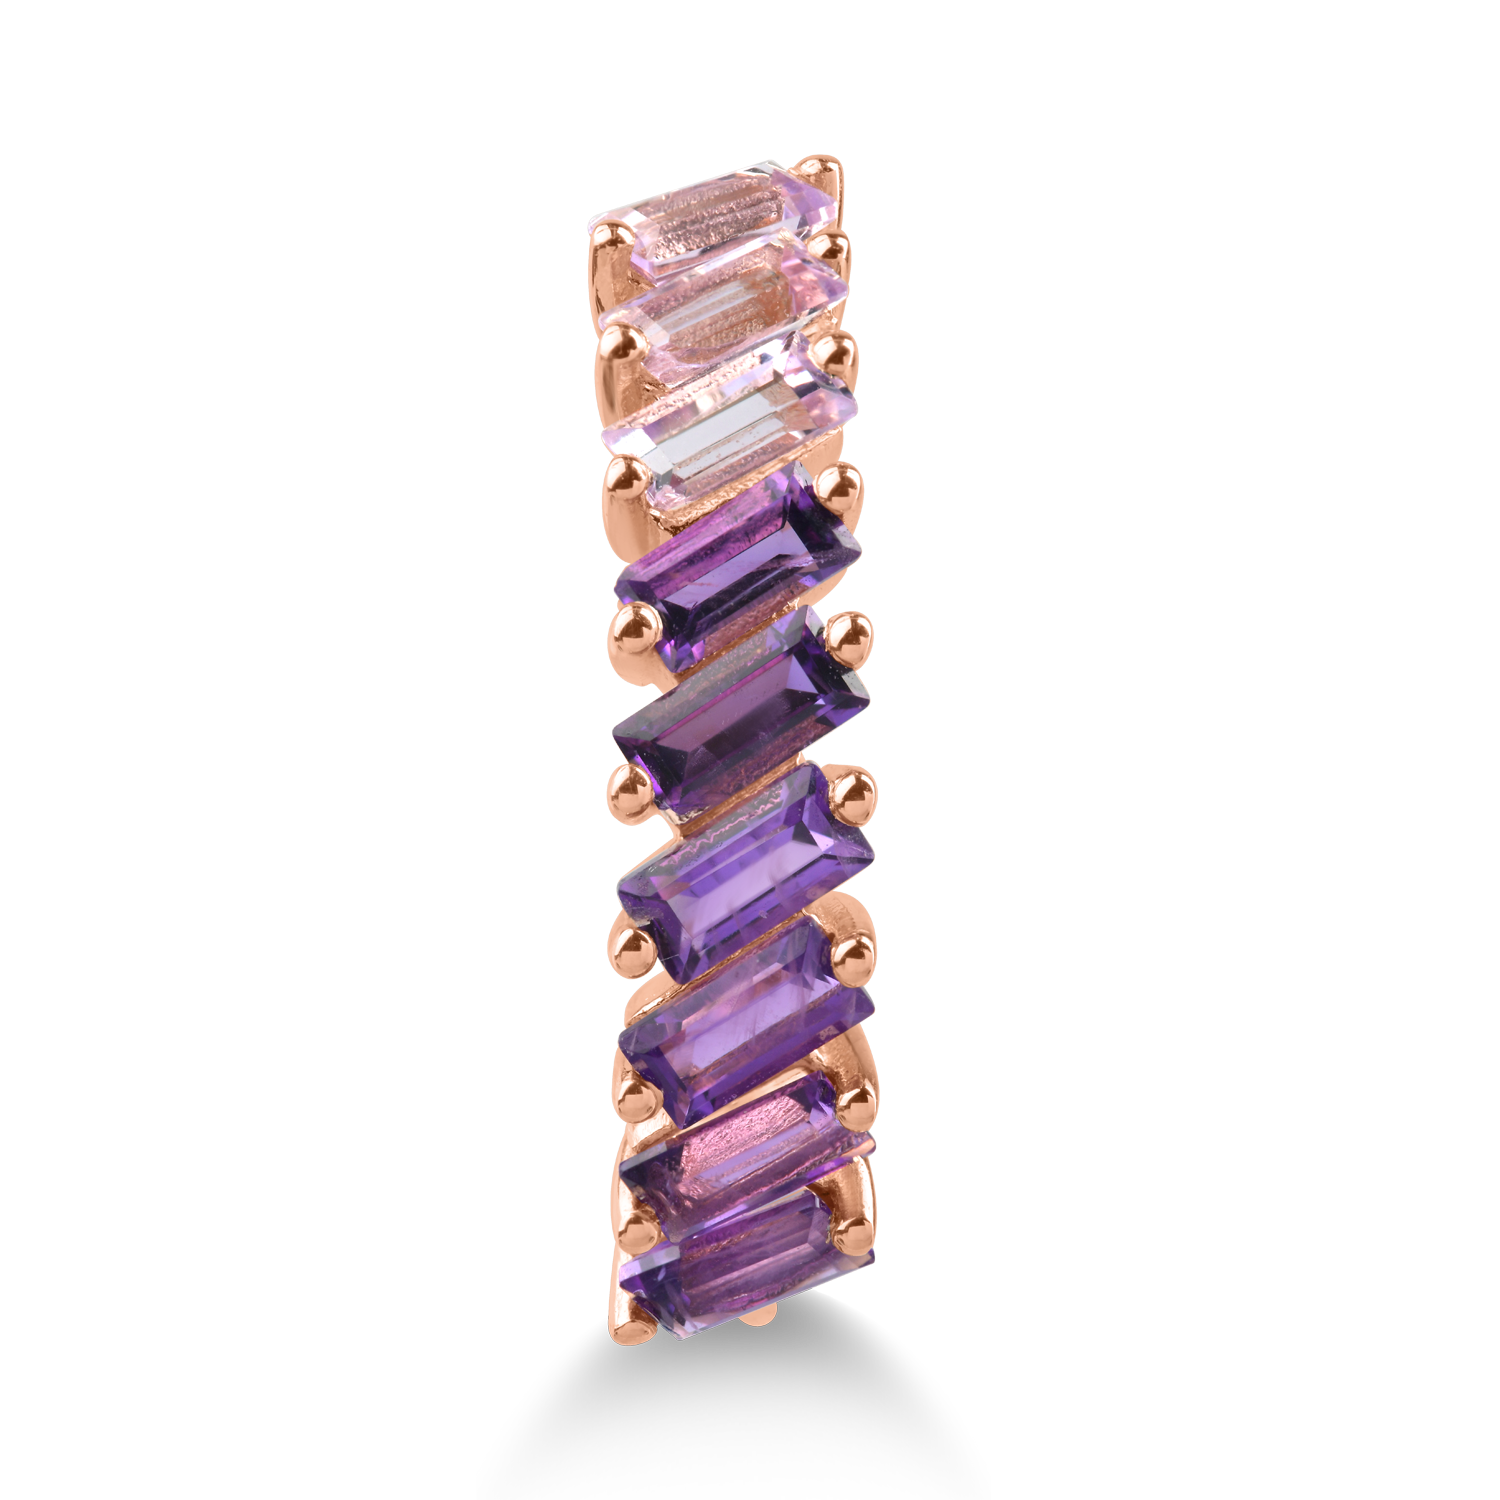 Rose gold ring with 0.94ct amethysts